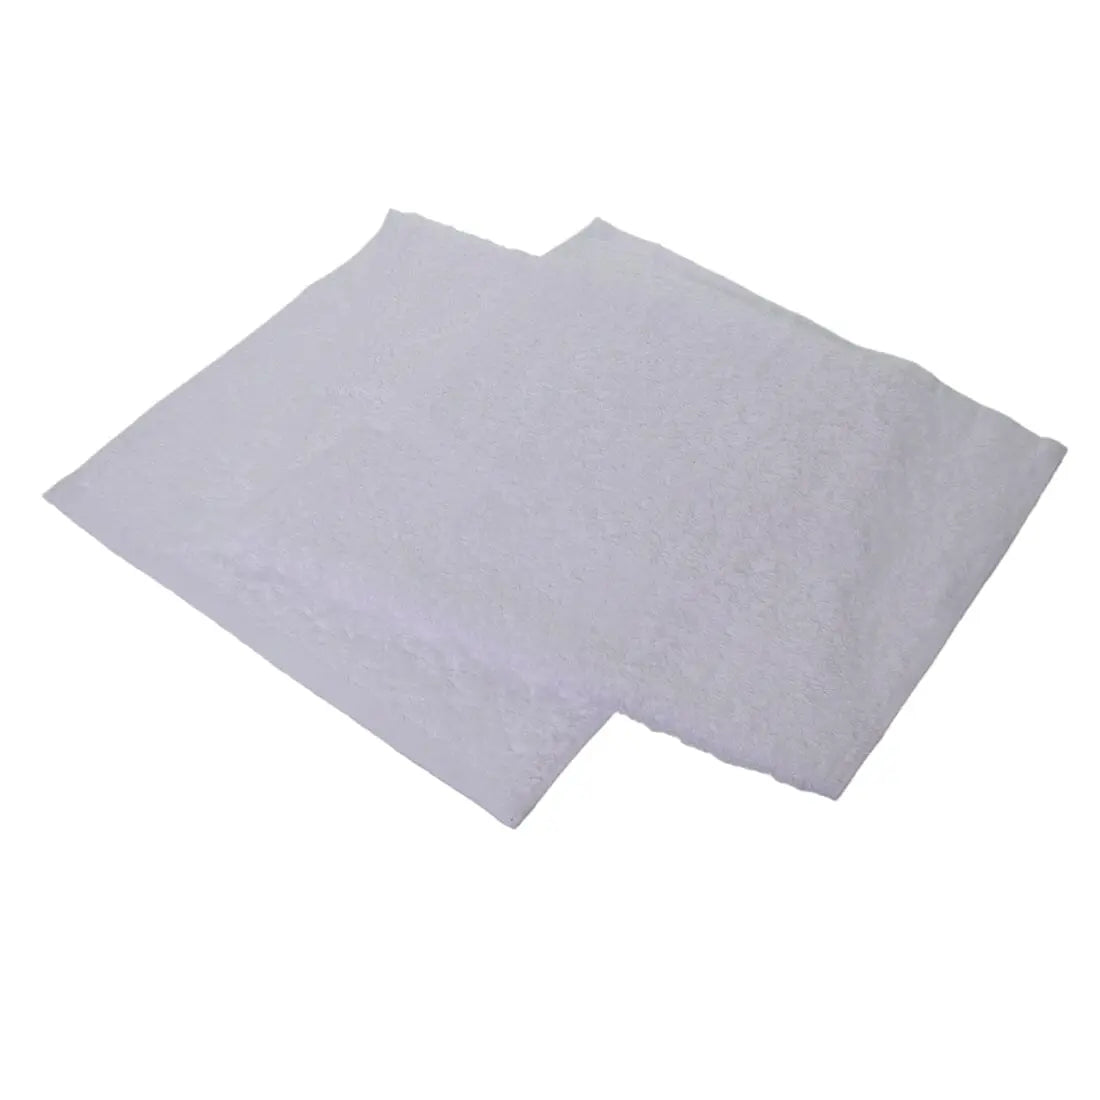 white fitness towel on a white background